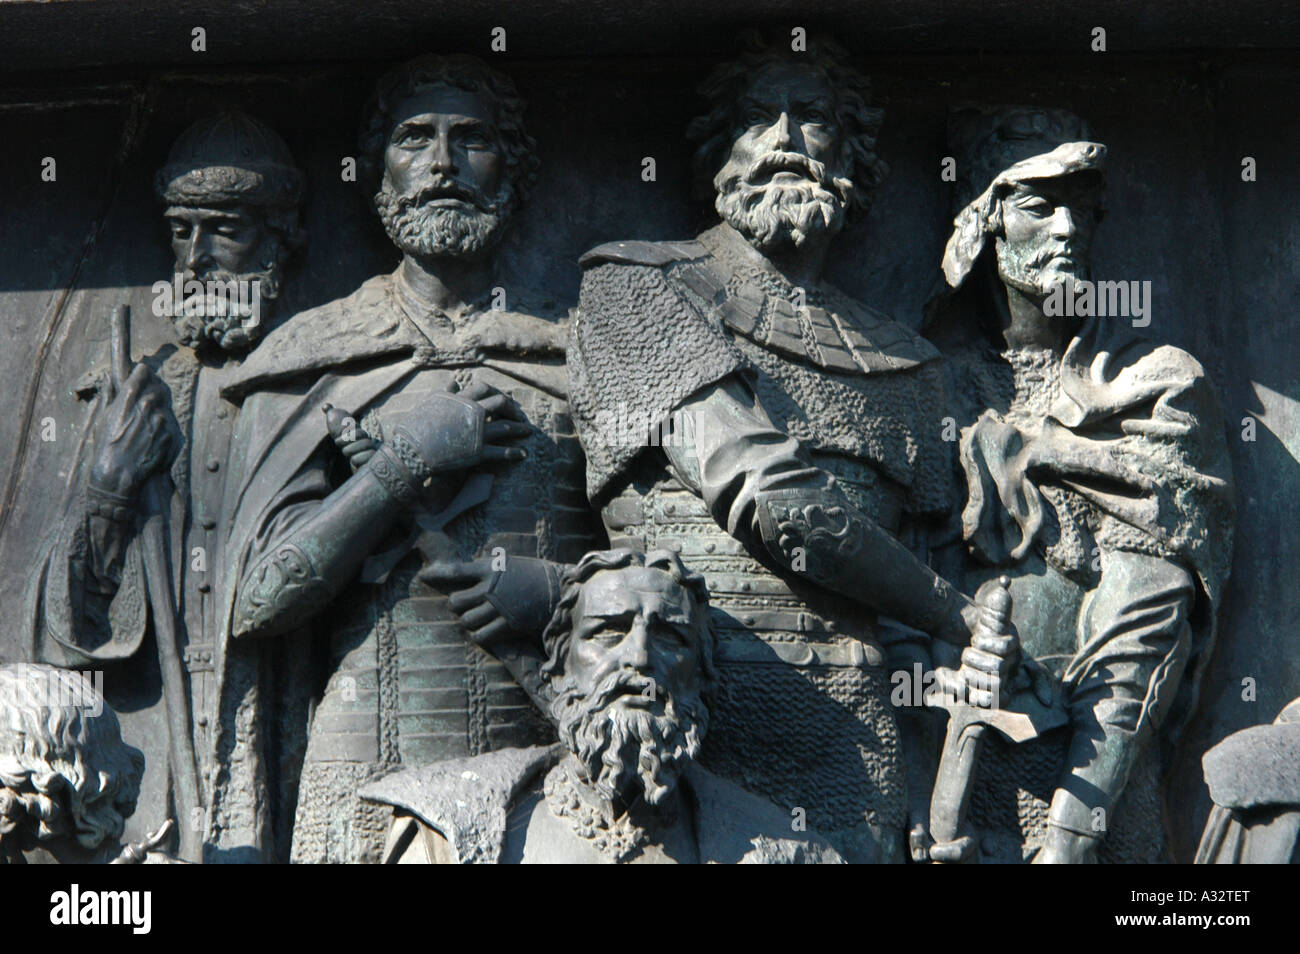 Russian St. Alexander Nevsky and Dmitry Donskoy. Detail of the Monument to the Millennium of Russia in Veliky Novgorod, Russia Stock Photo